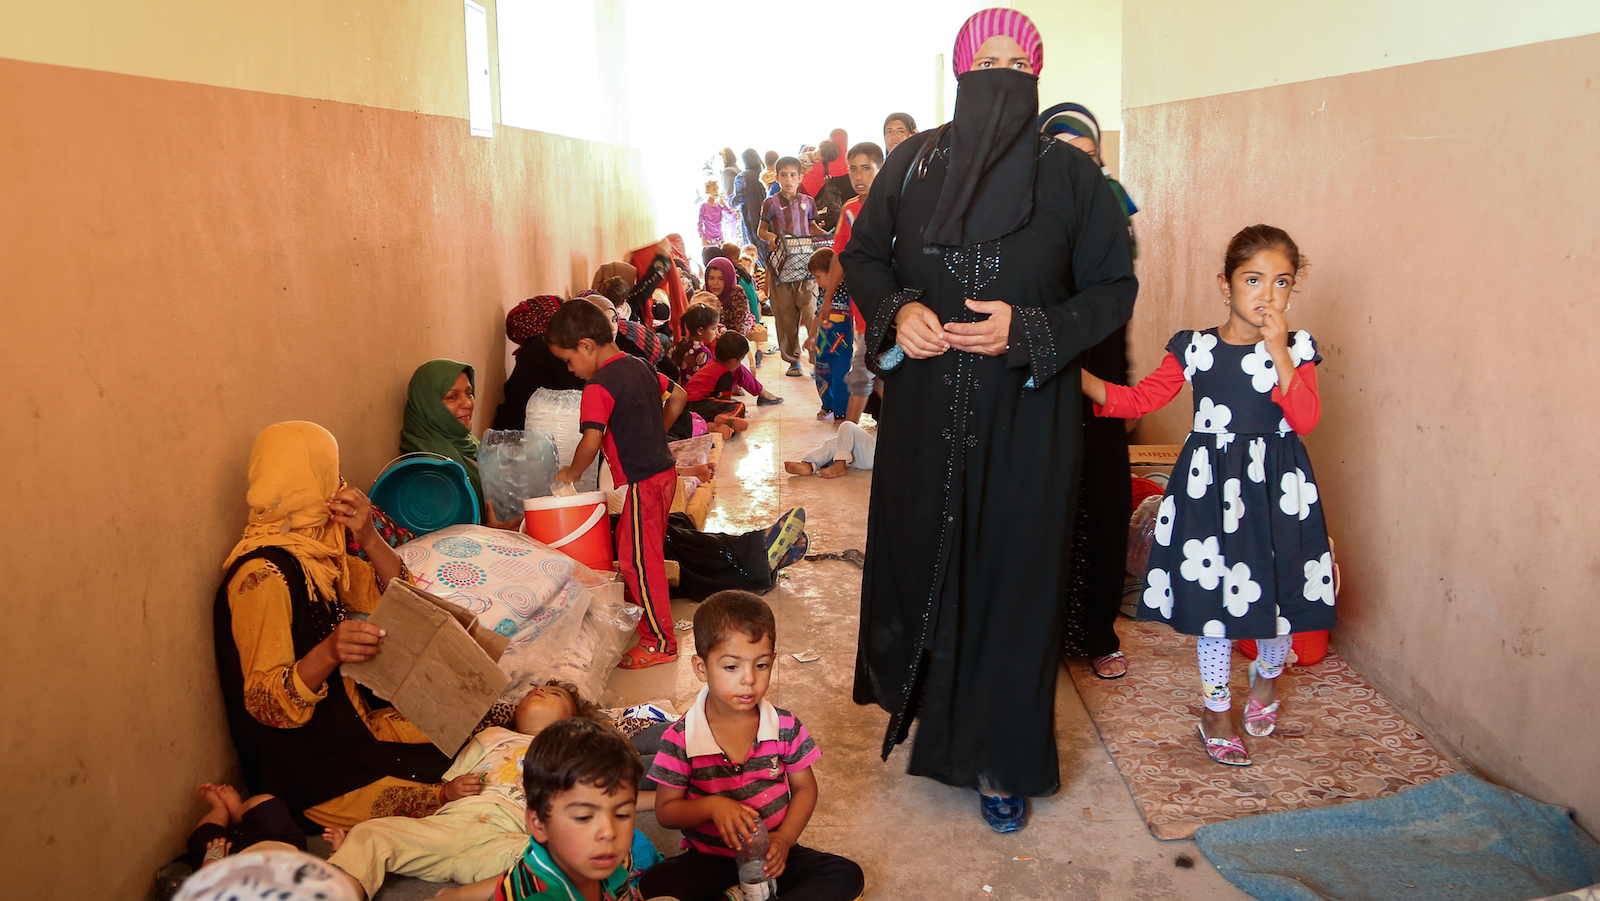 Iraq crisis: Hada and her daughter walk through the hall of a former school that serves as a transition center for women and children at Debaga camp in Iraq. (©2016 World Vision, Suzy Sainovski)